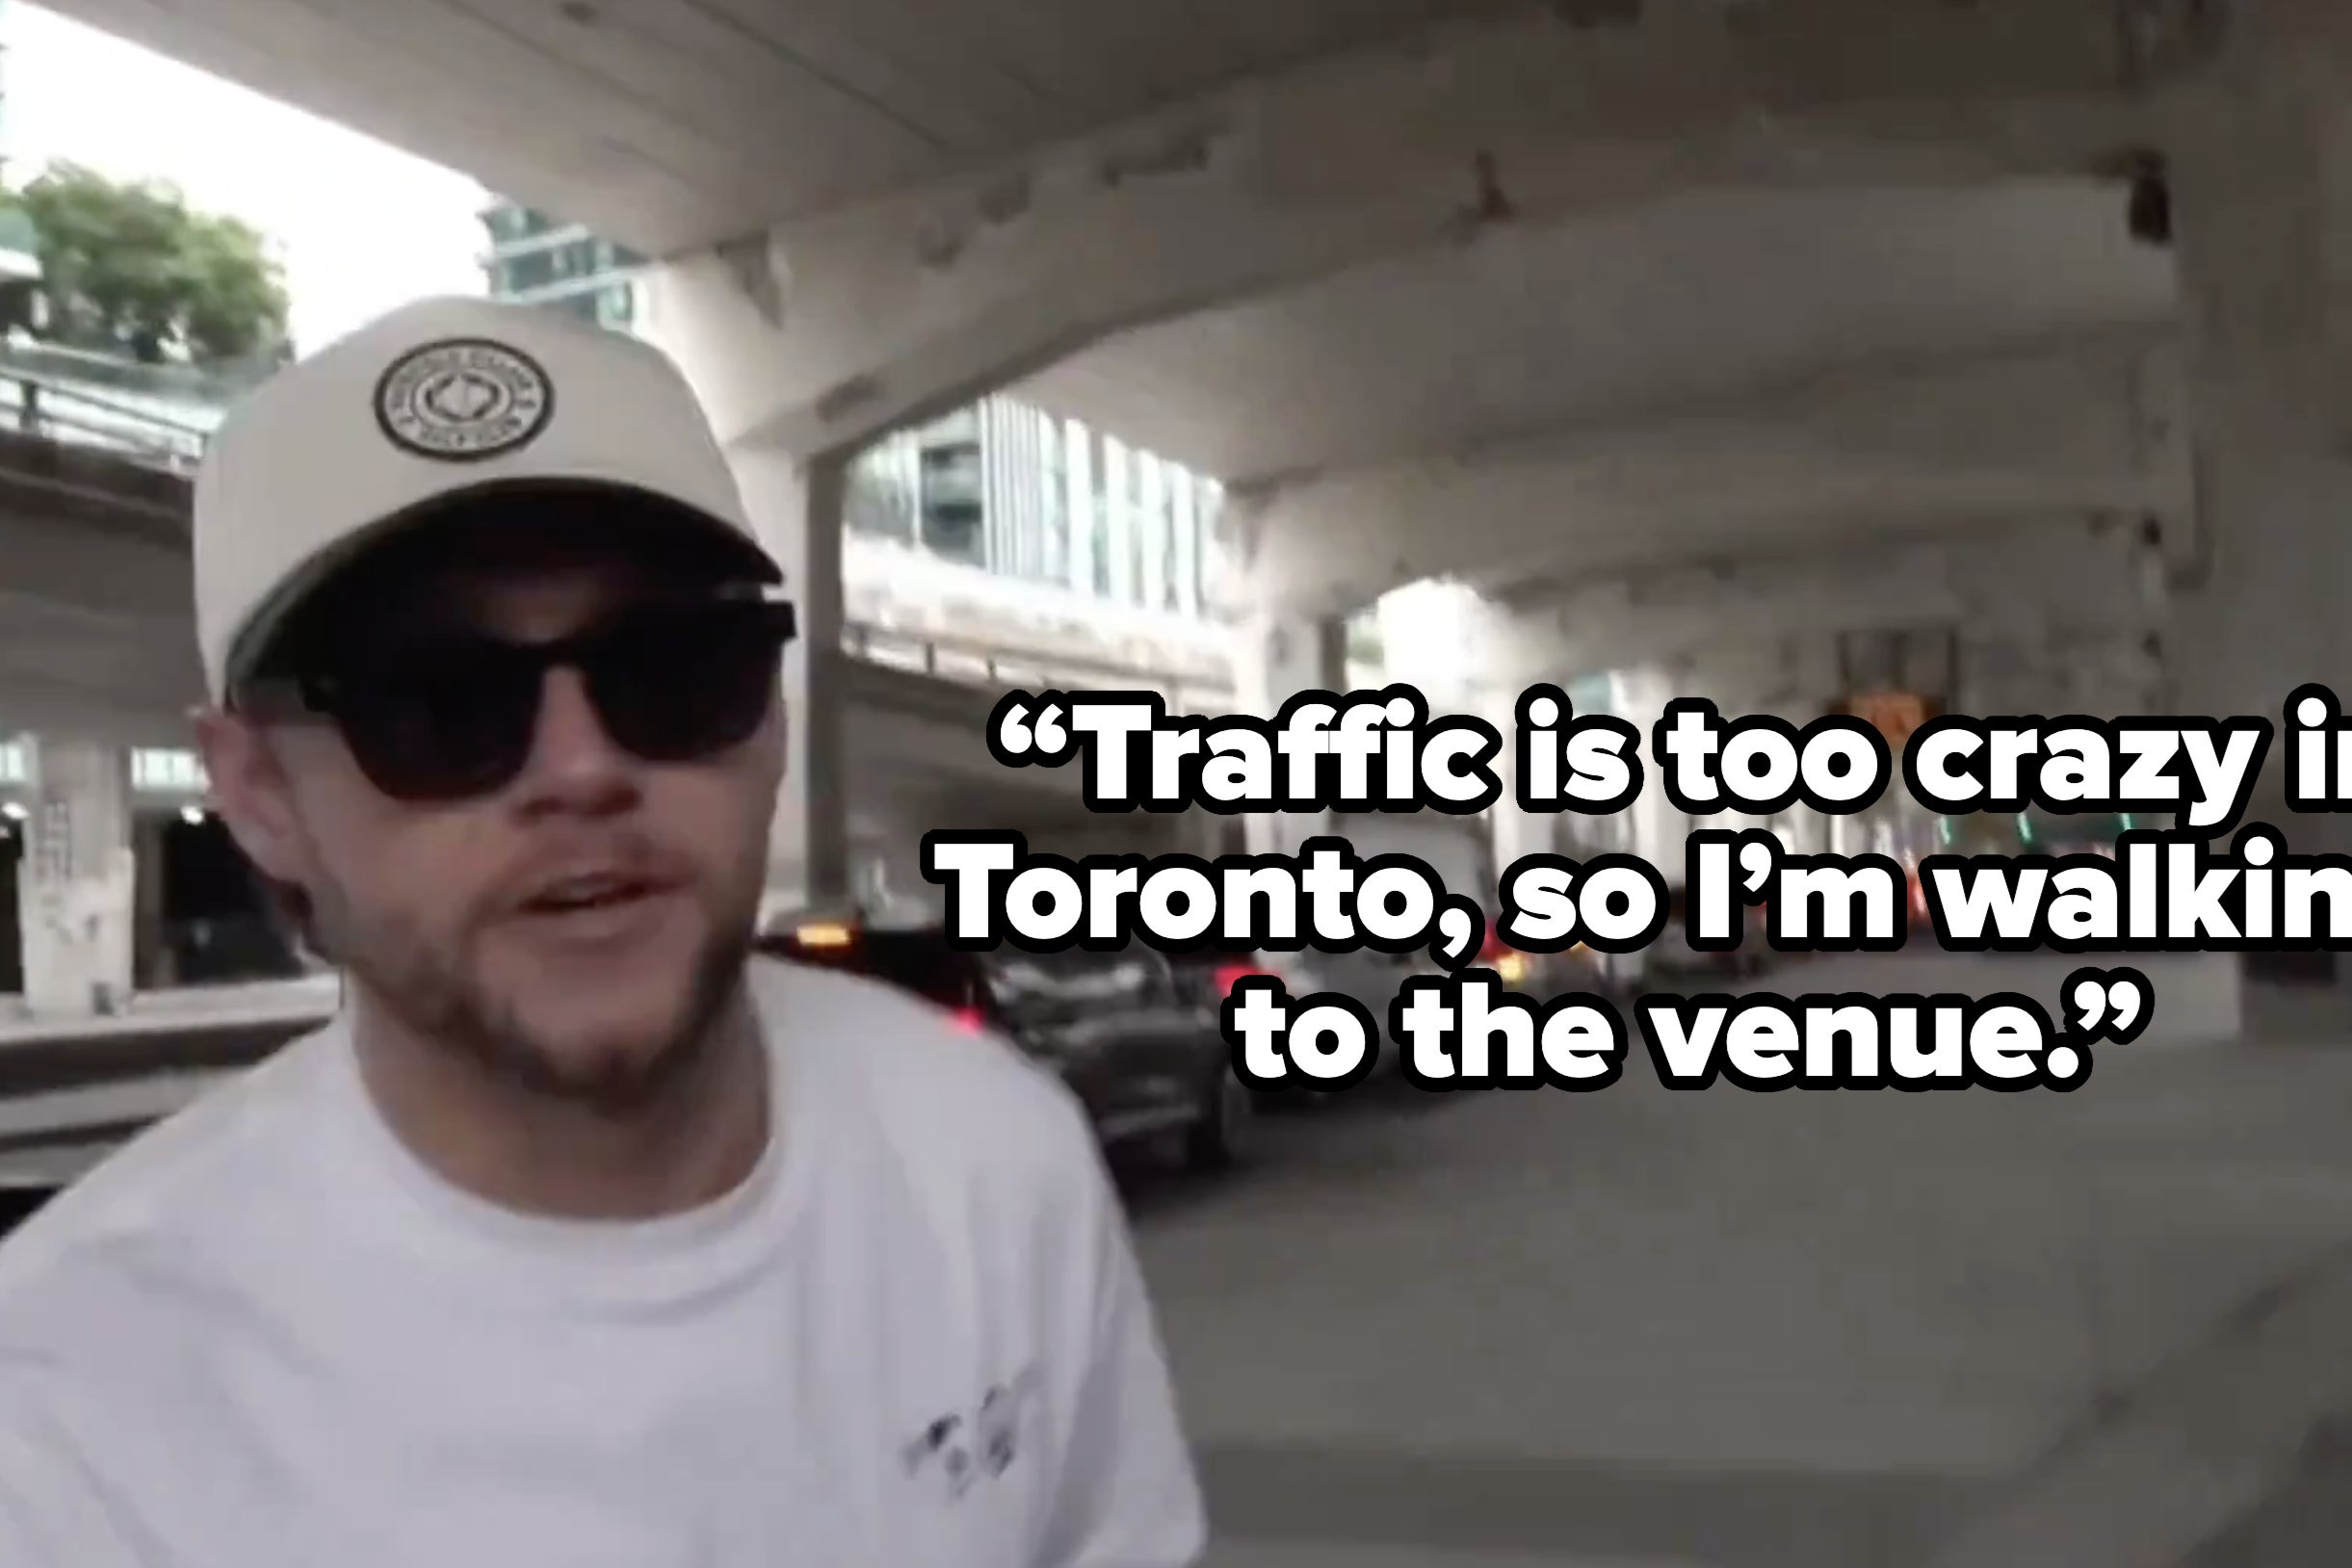 Niall Horan Calls Out Toronto For Forcing Him To Walk To His Sold-Out Stadium Show